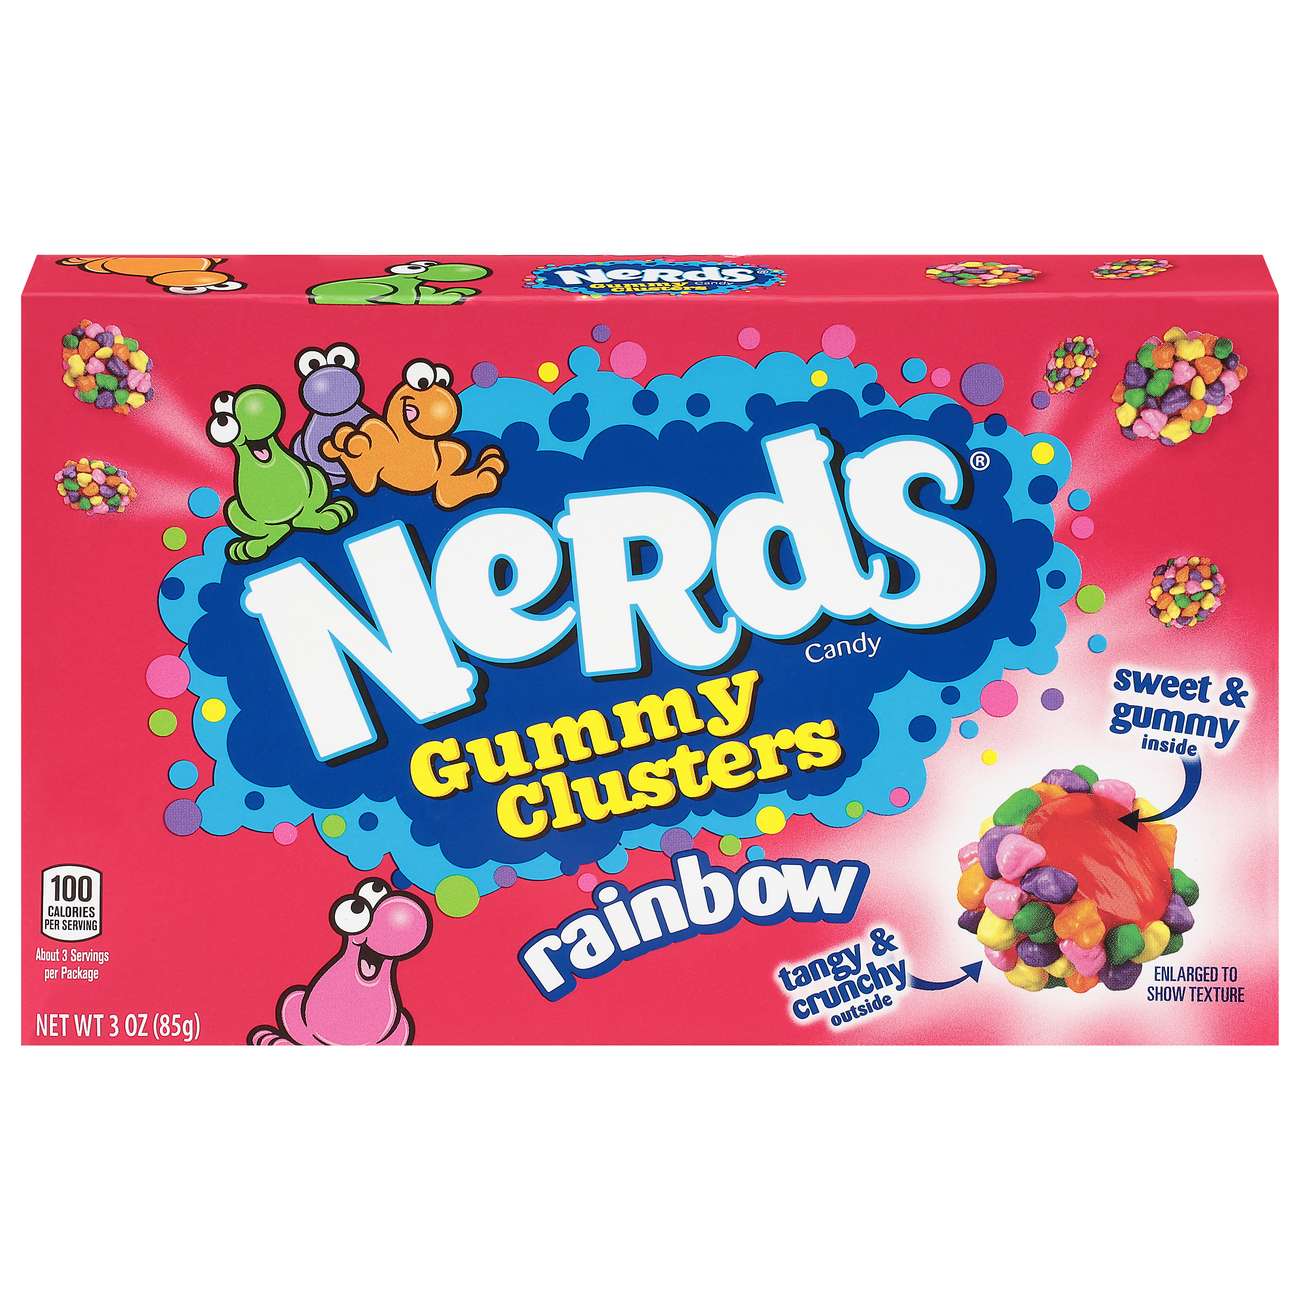 Nerds Gummy Clusters Theater Box; image 1 of 2